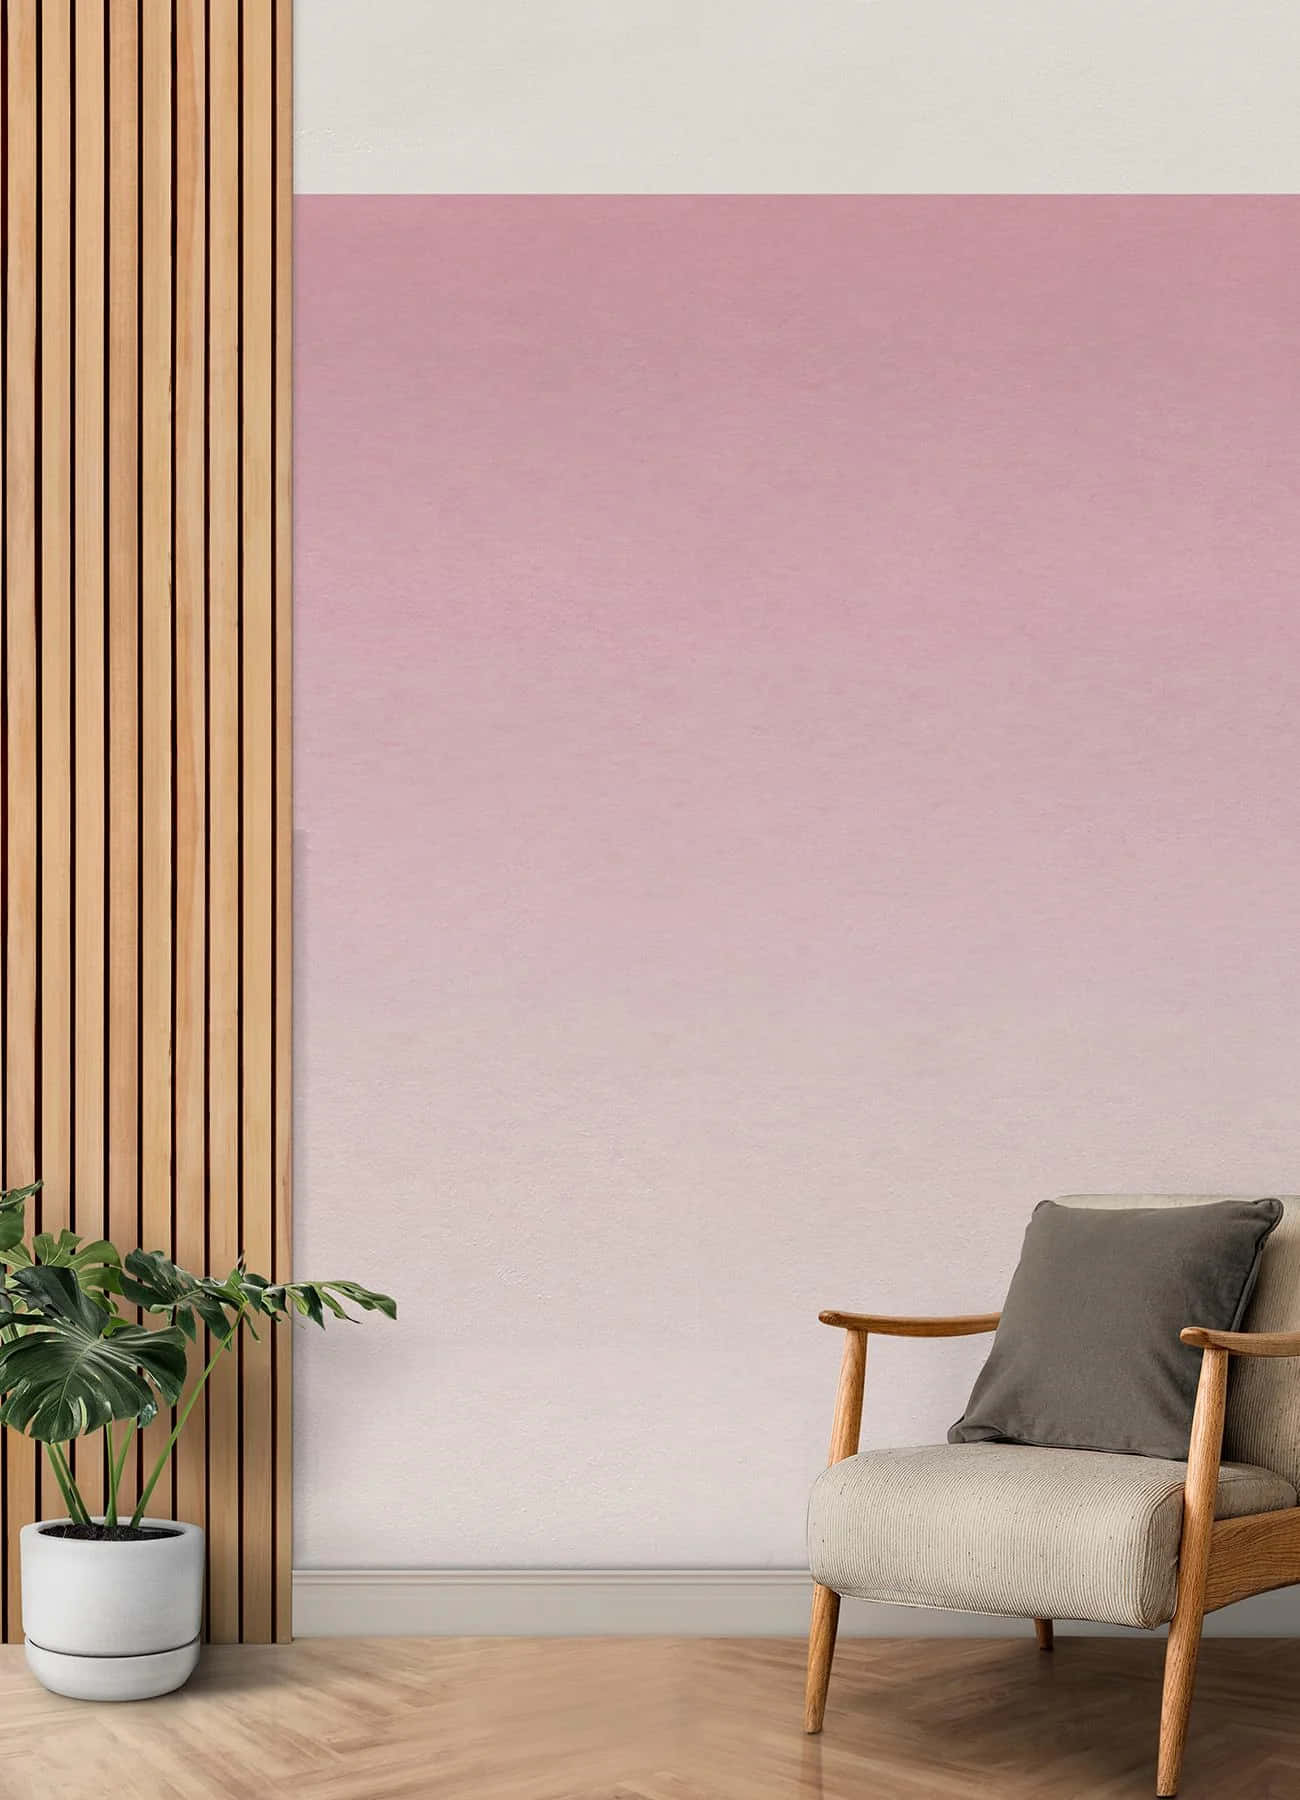 Pink Ombre Wallwith Wood Accentsand Modern Chair Wallpaper